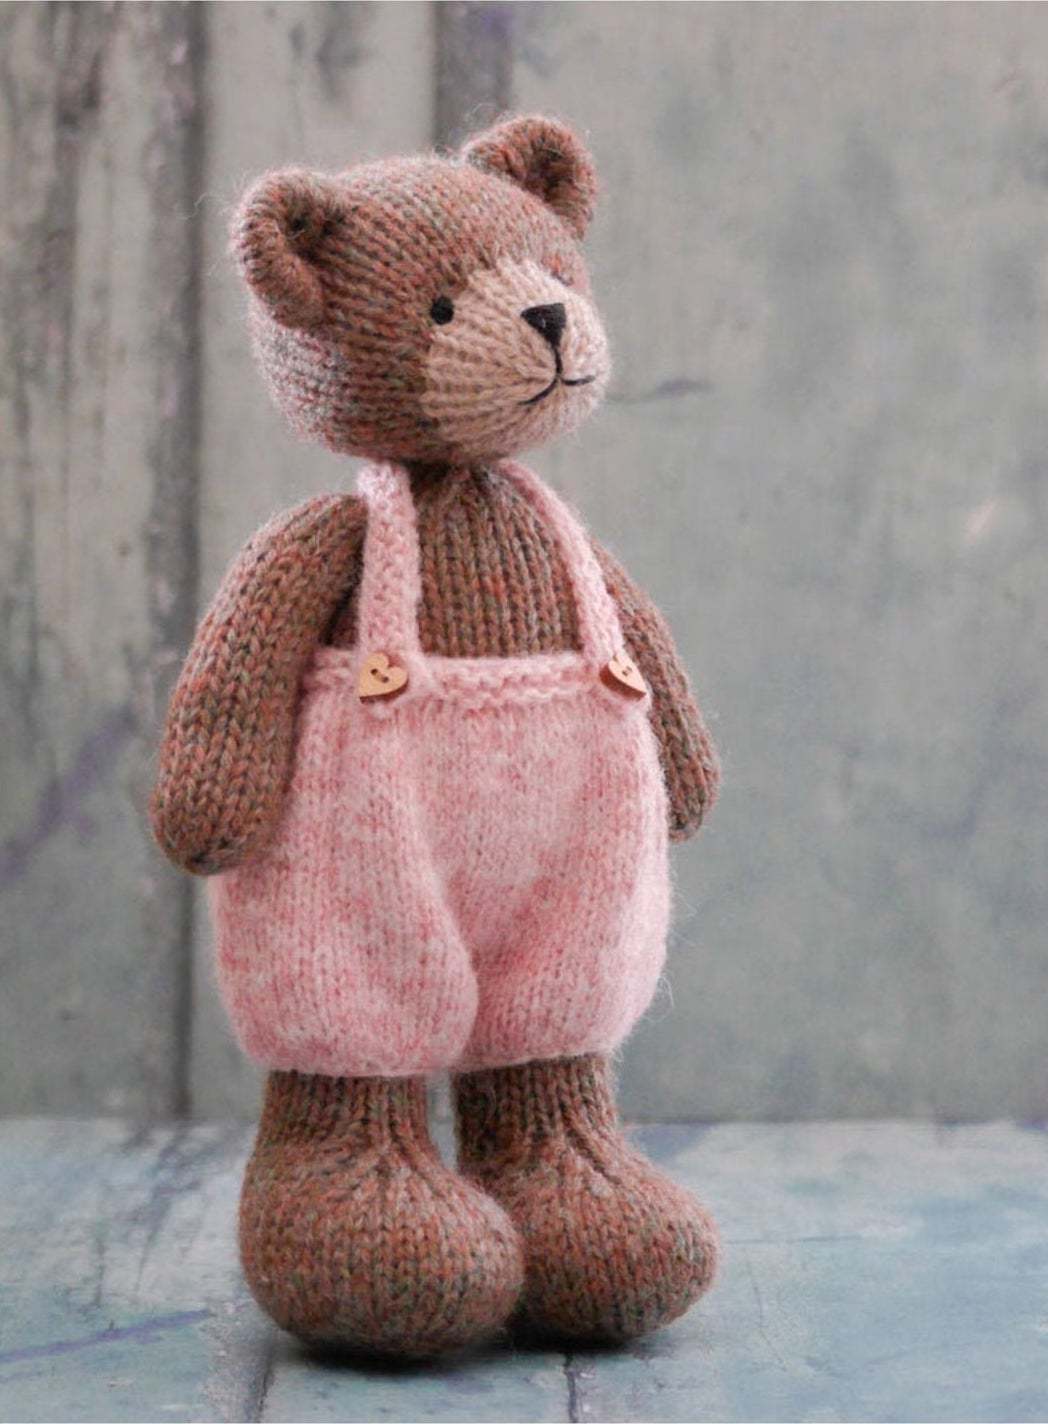 Simple knit bear 's sweater / bear outfit 